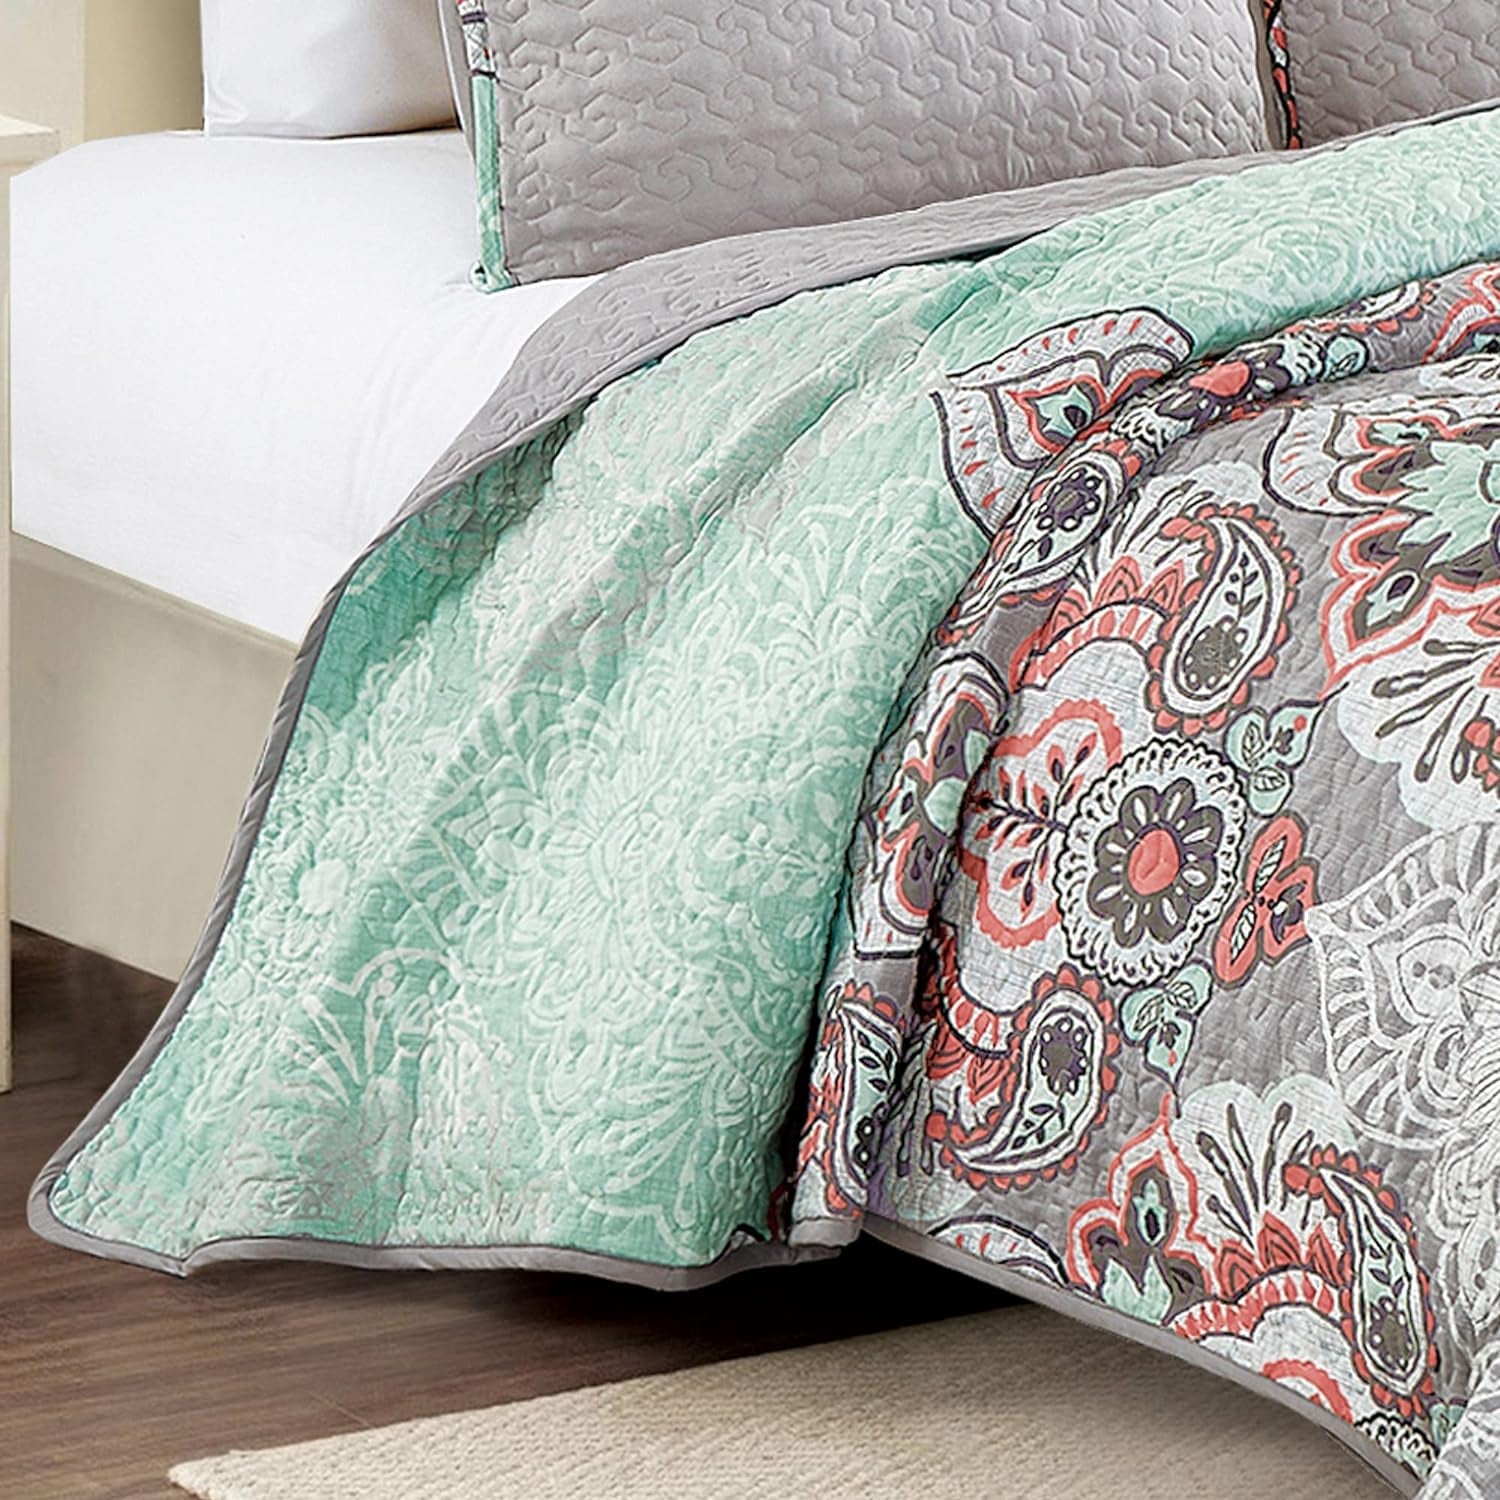 3-Piece Fine Printed King Size Quilt Set, All-Season Bedspread, Bisgu Coverlet with Pillow Shams Bed Cover (Green, Orange, Brown, Grey, Paisley)